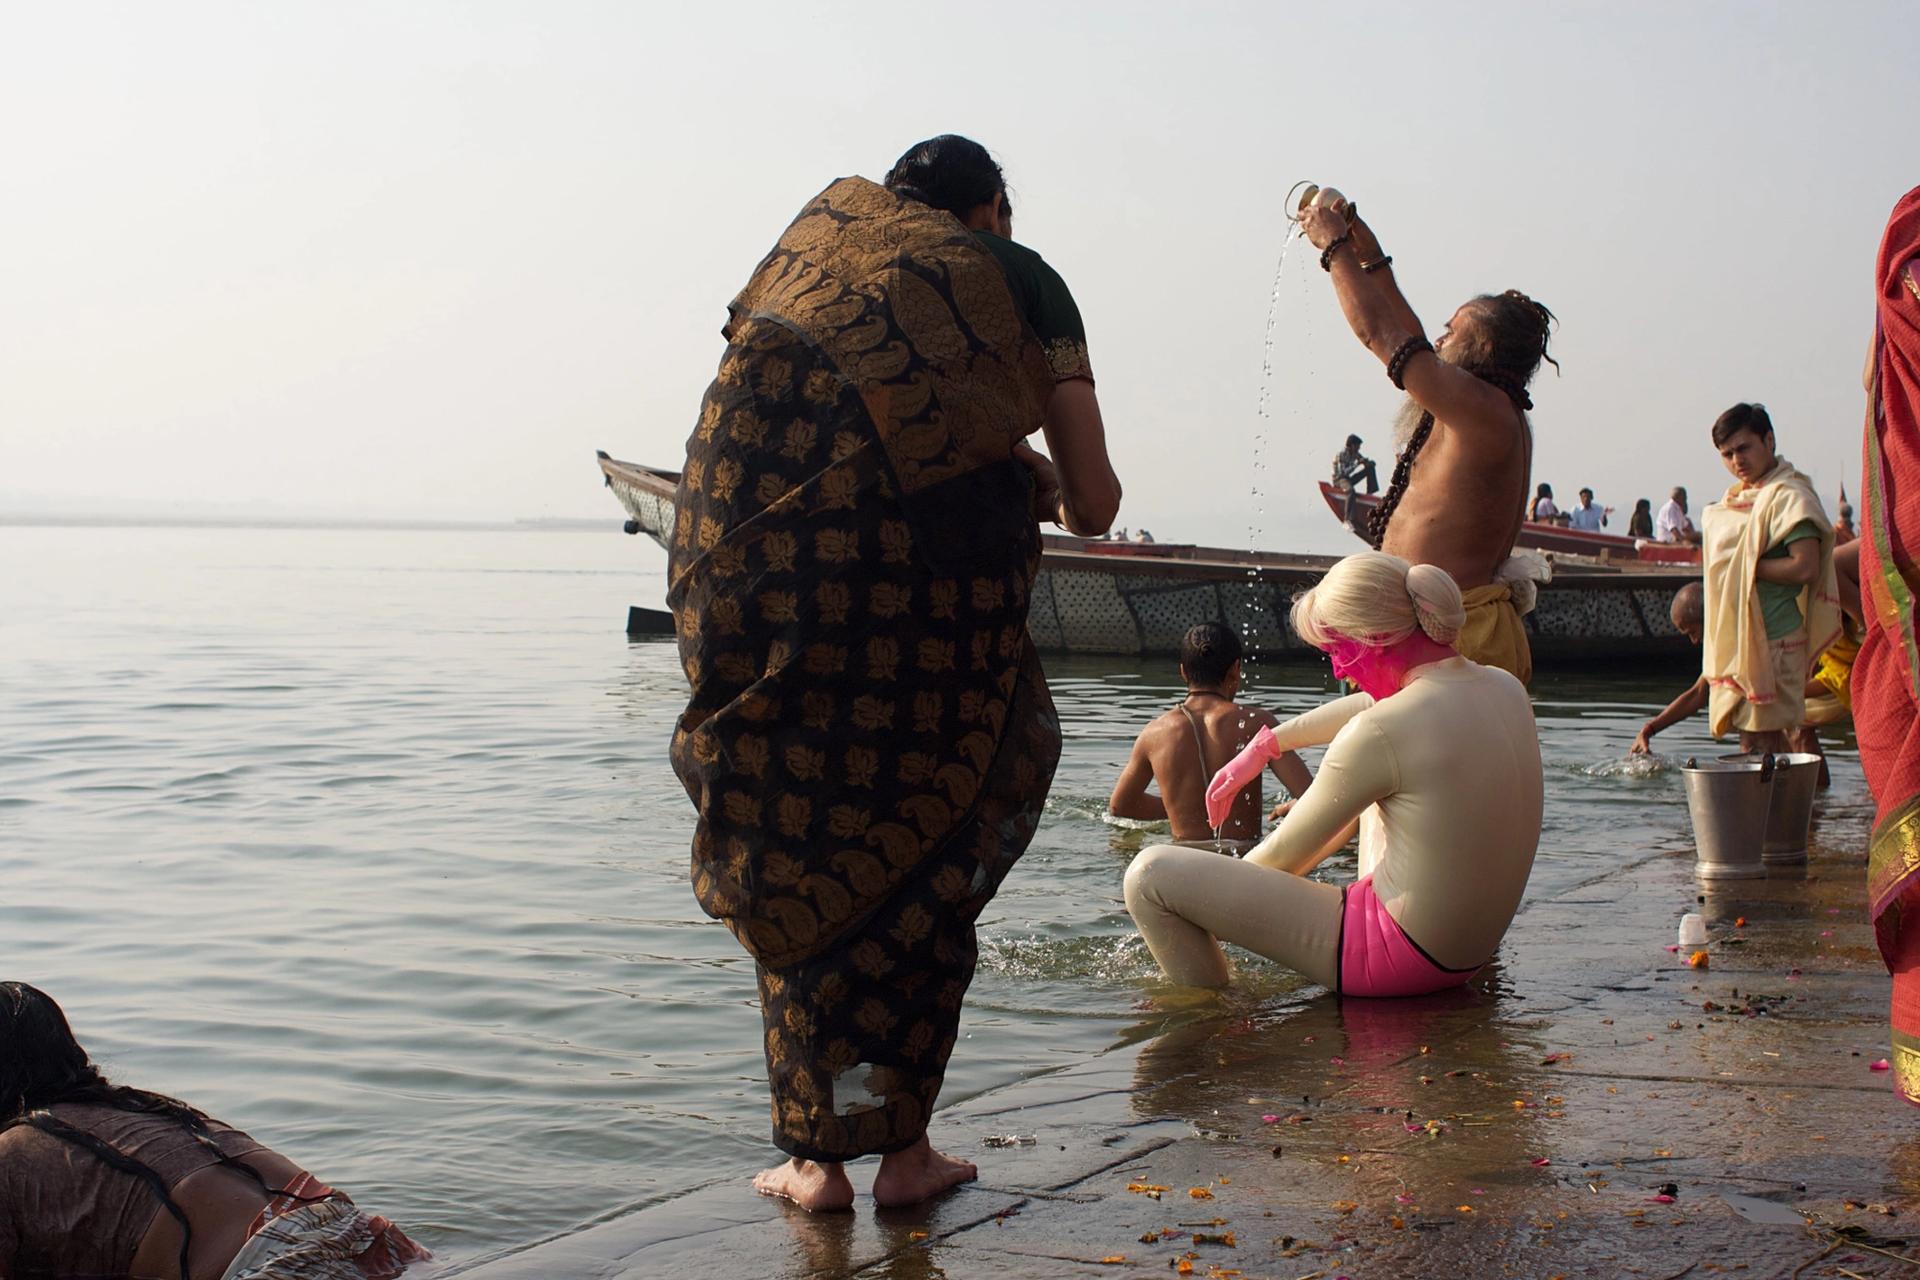 Transformella performs ablutions during her tech-fertility-oriented research trip to Varanasi.